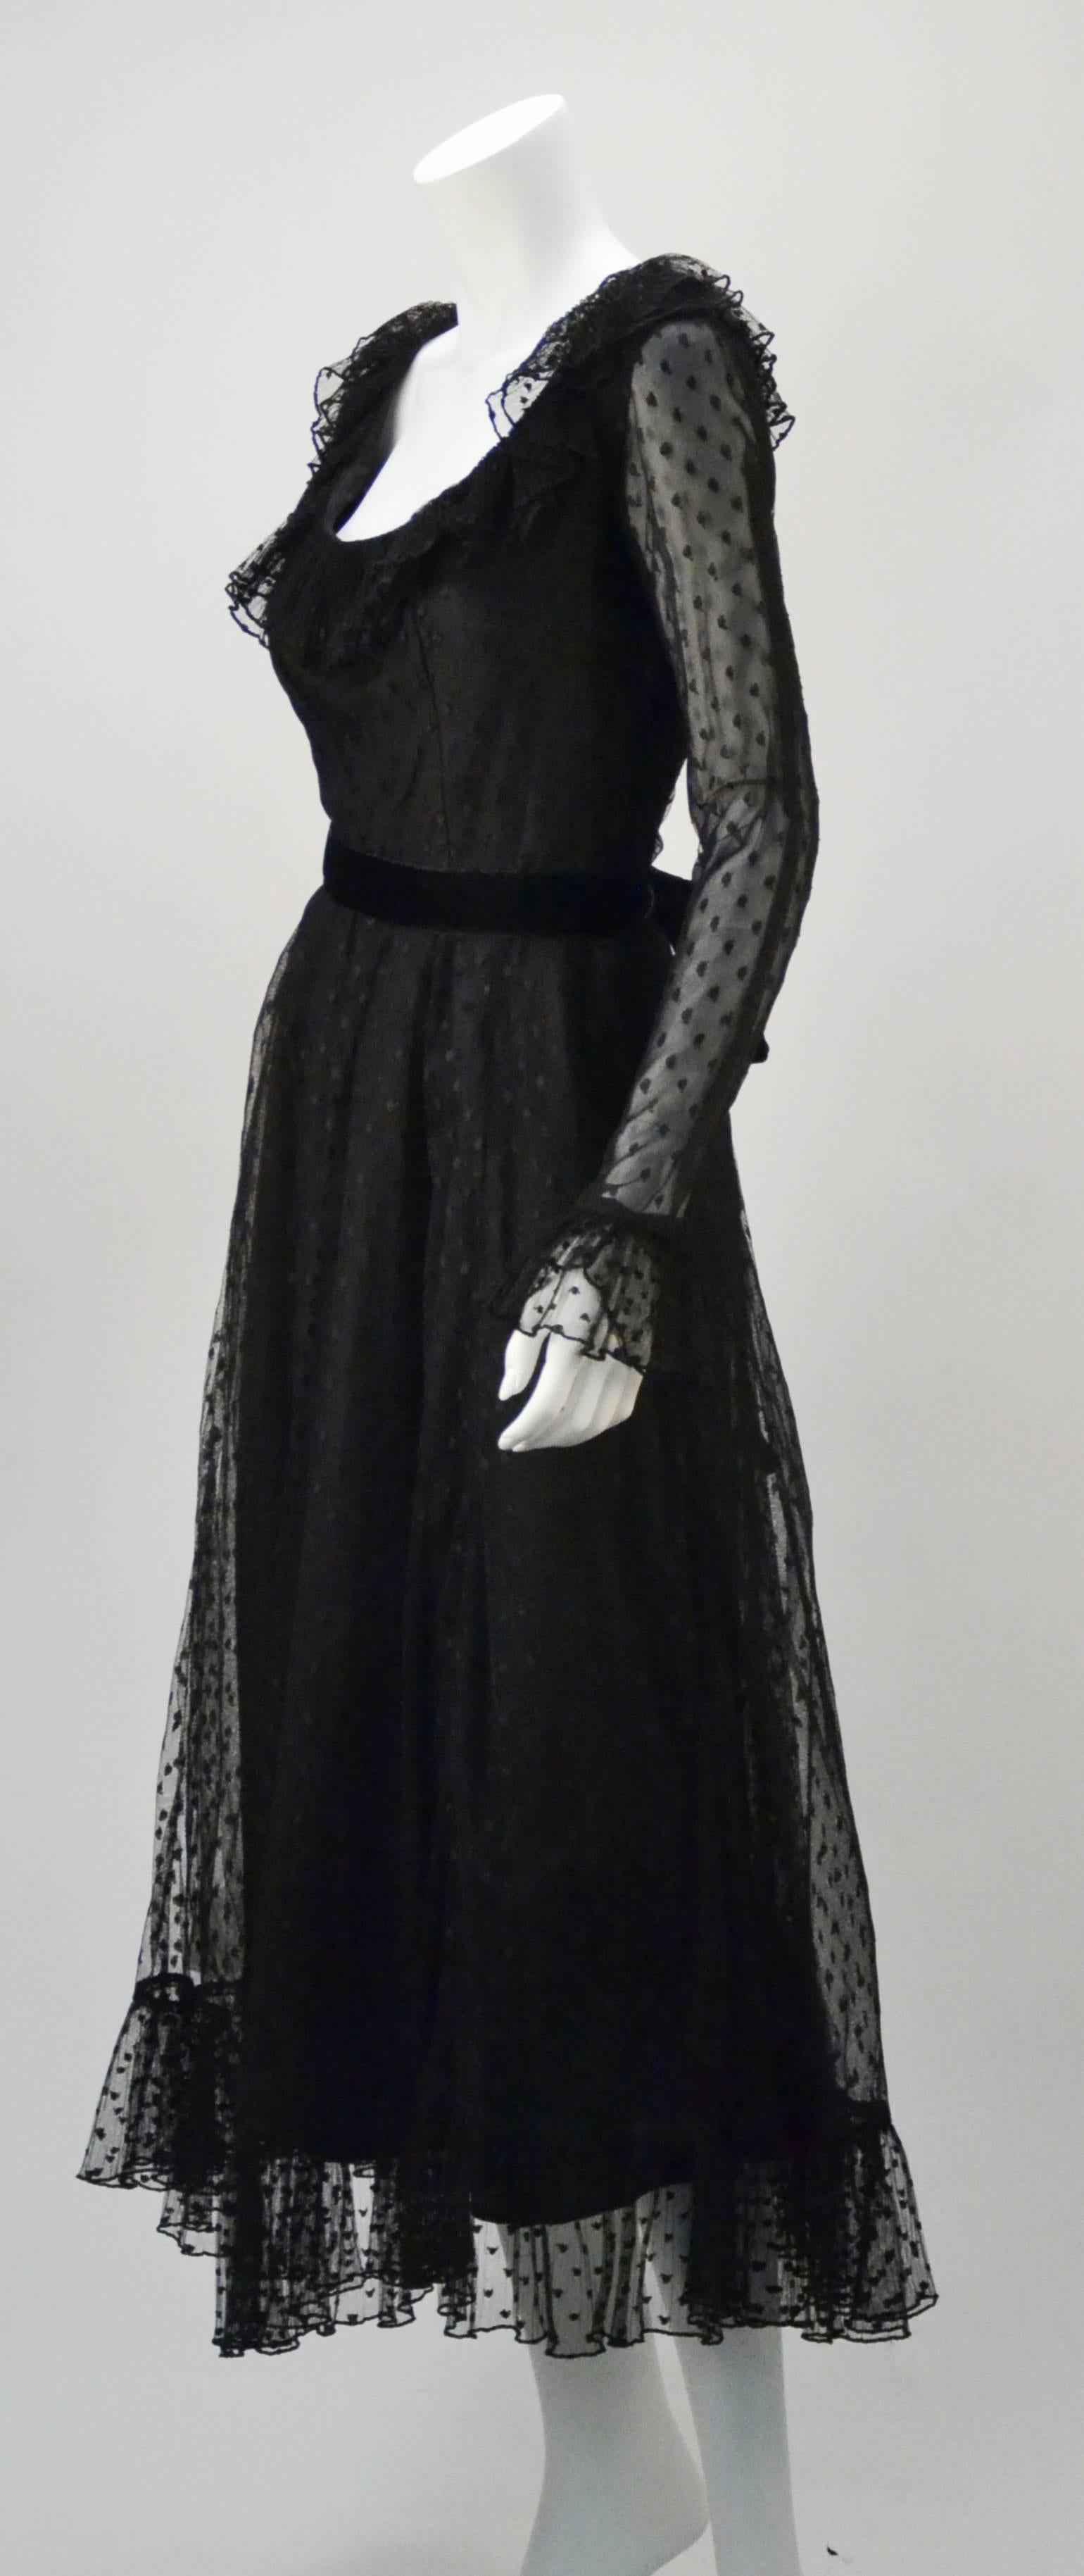 Sweet and feminine with a little femme fatale, 1970's black long sleeve evening dress with lace polka dot overlay by American Designer Victor Costa. The sleeve and skirt hems have a ruffled silhouette. The sleeves also have a snap closure at the